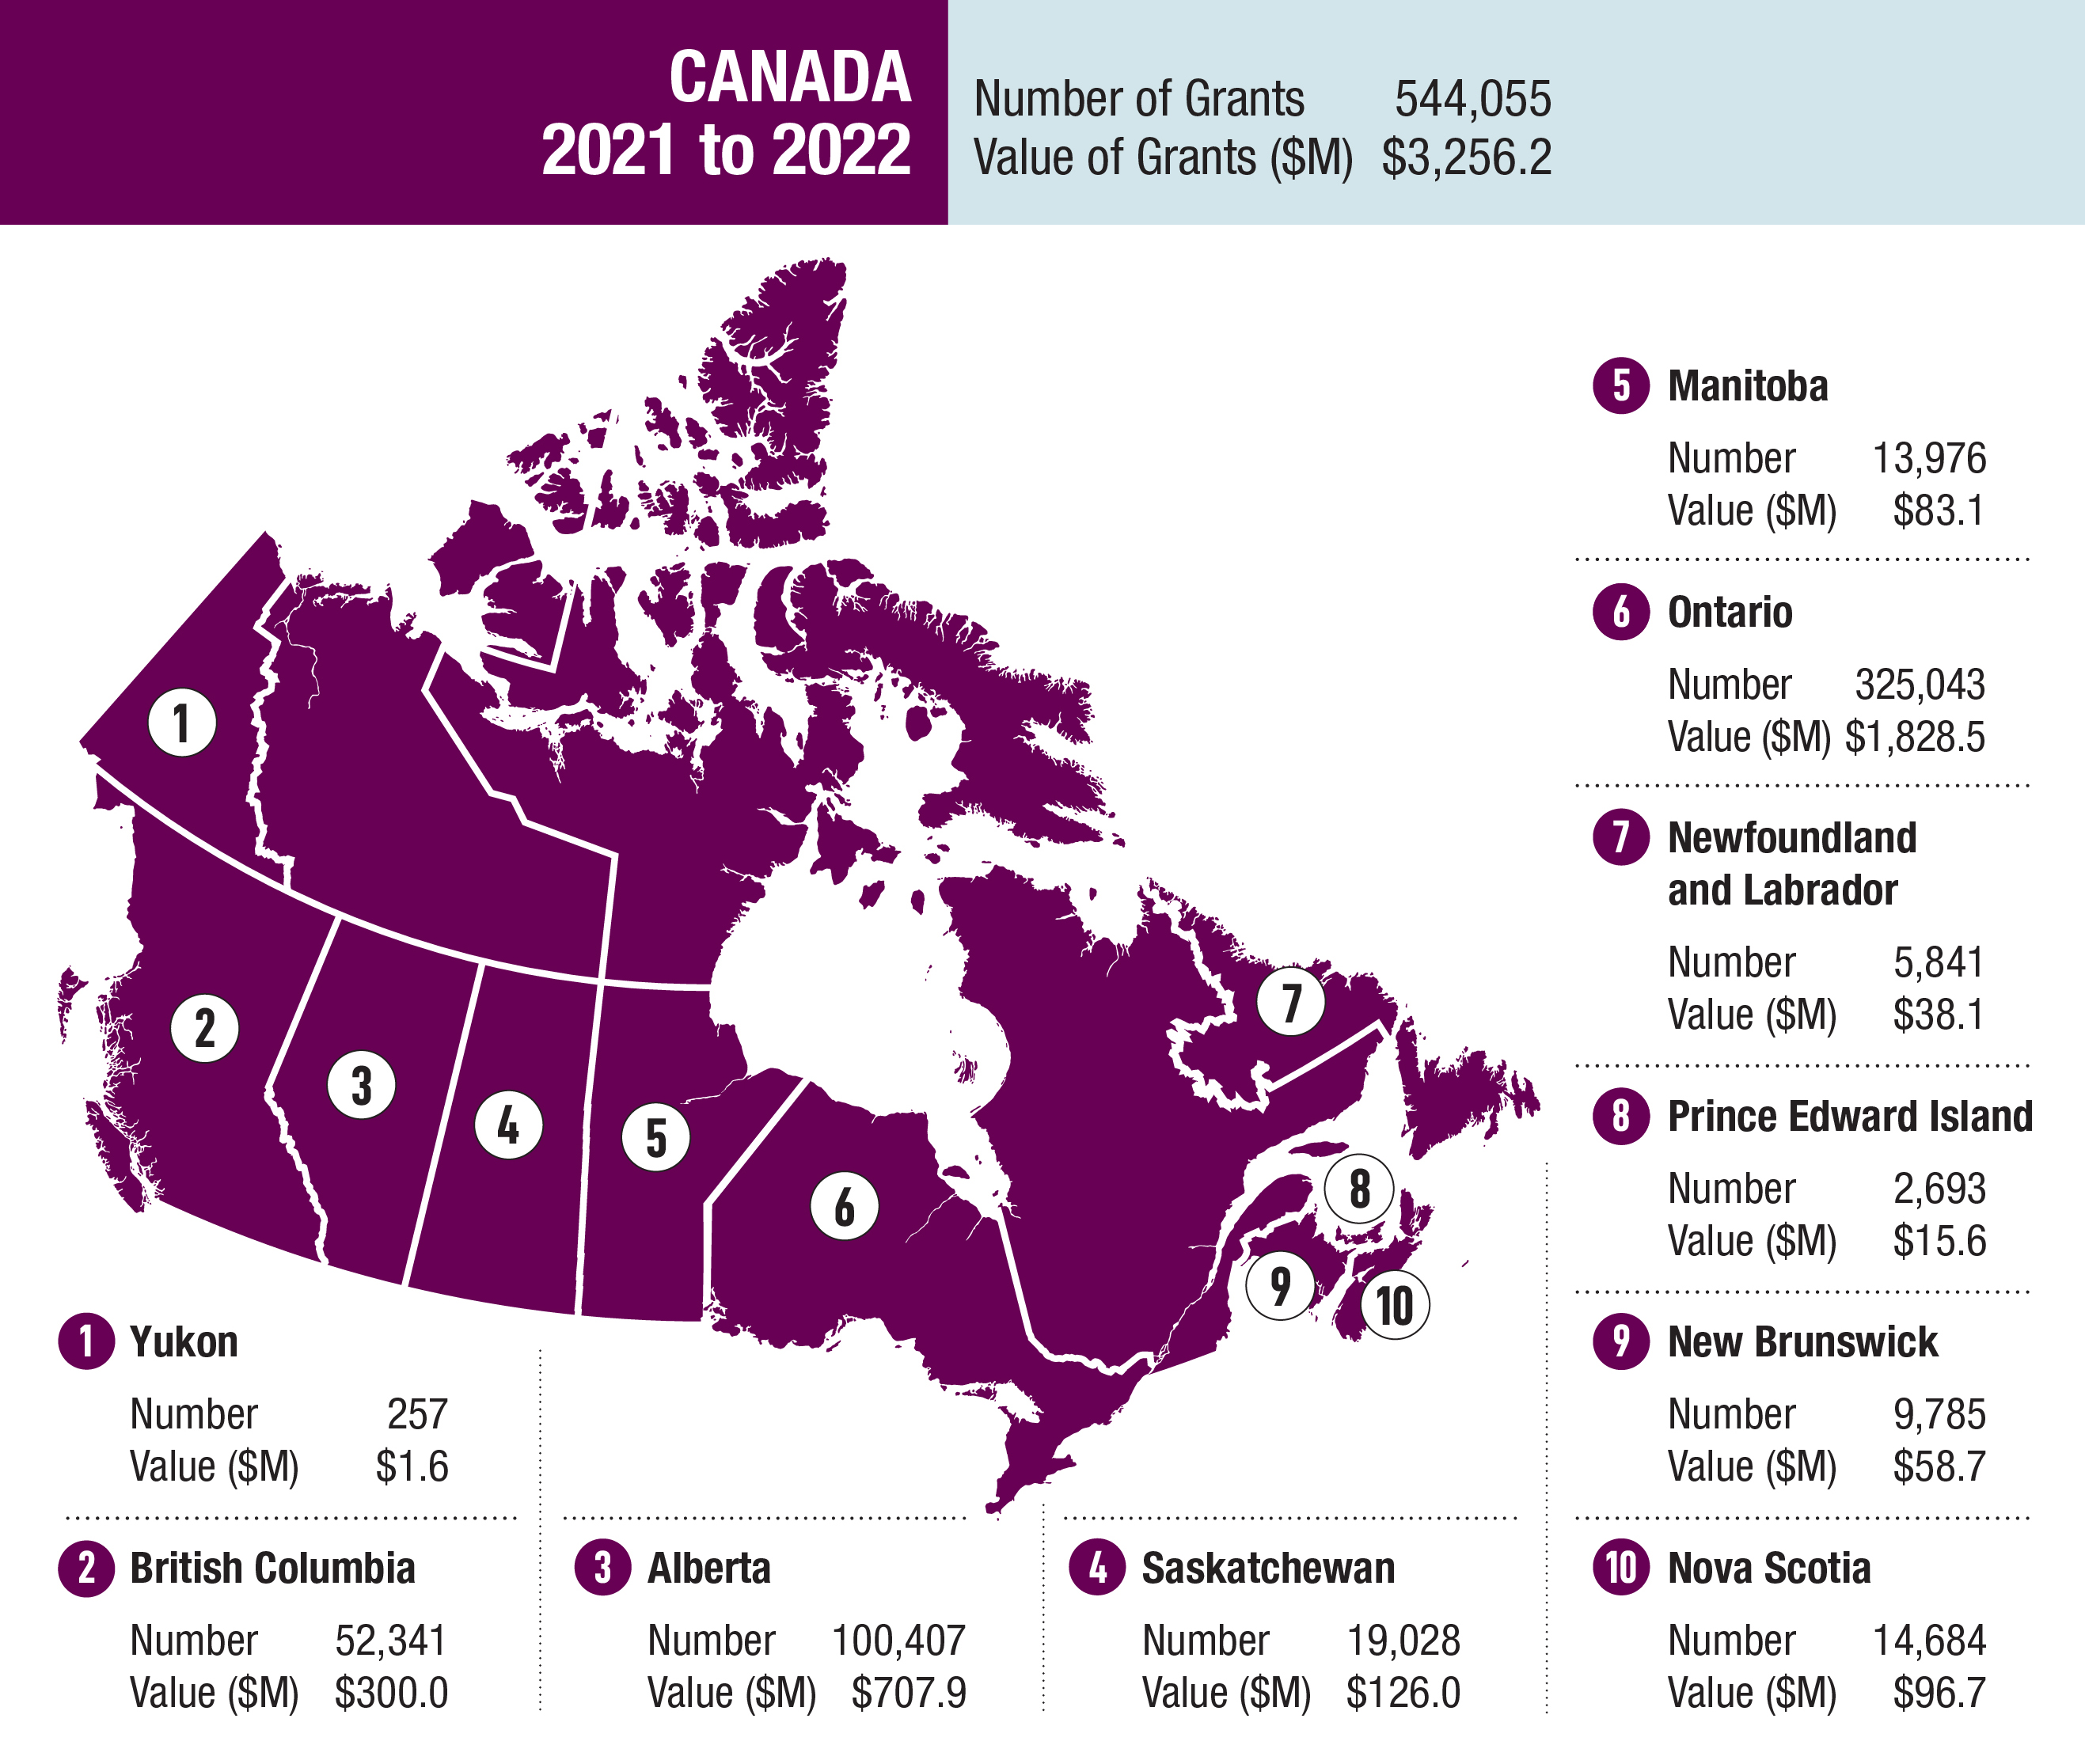 A map of Canada identifying the provinces and territory in the CSFA Program by number, and then displaying the number of grants disbursed and the total value of grants disbursed by province.